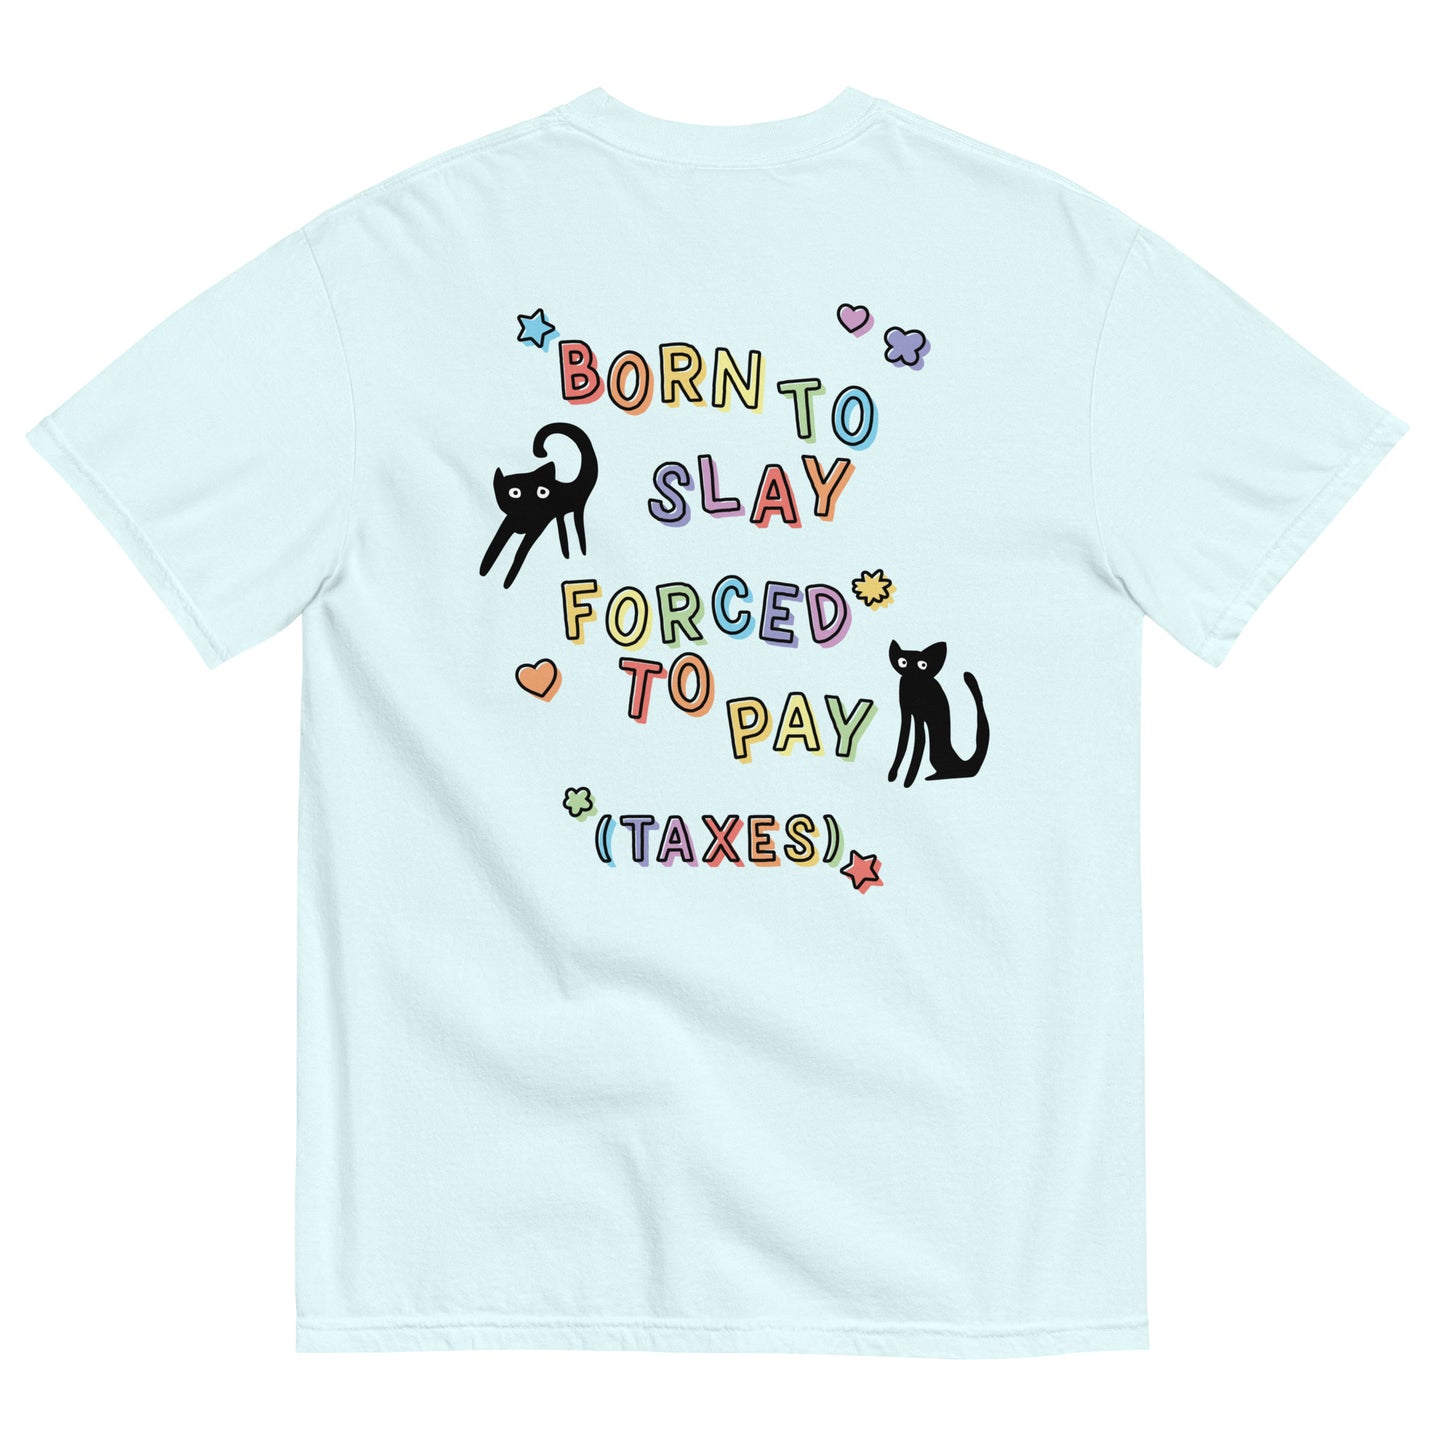 Born to Slay (front & back) Unisex Comfort Colors t-shirt